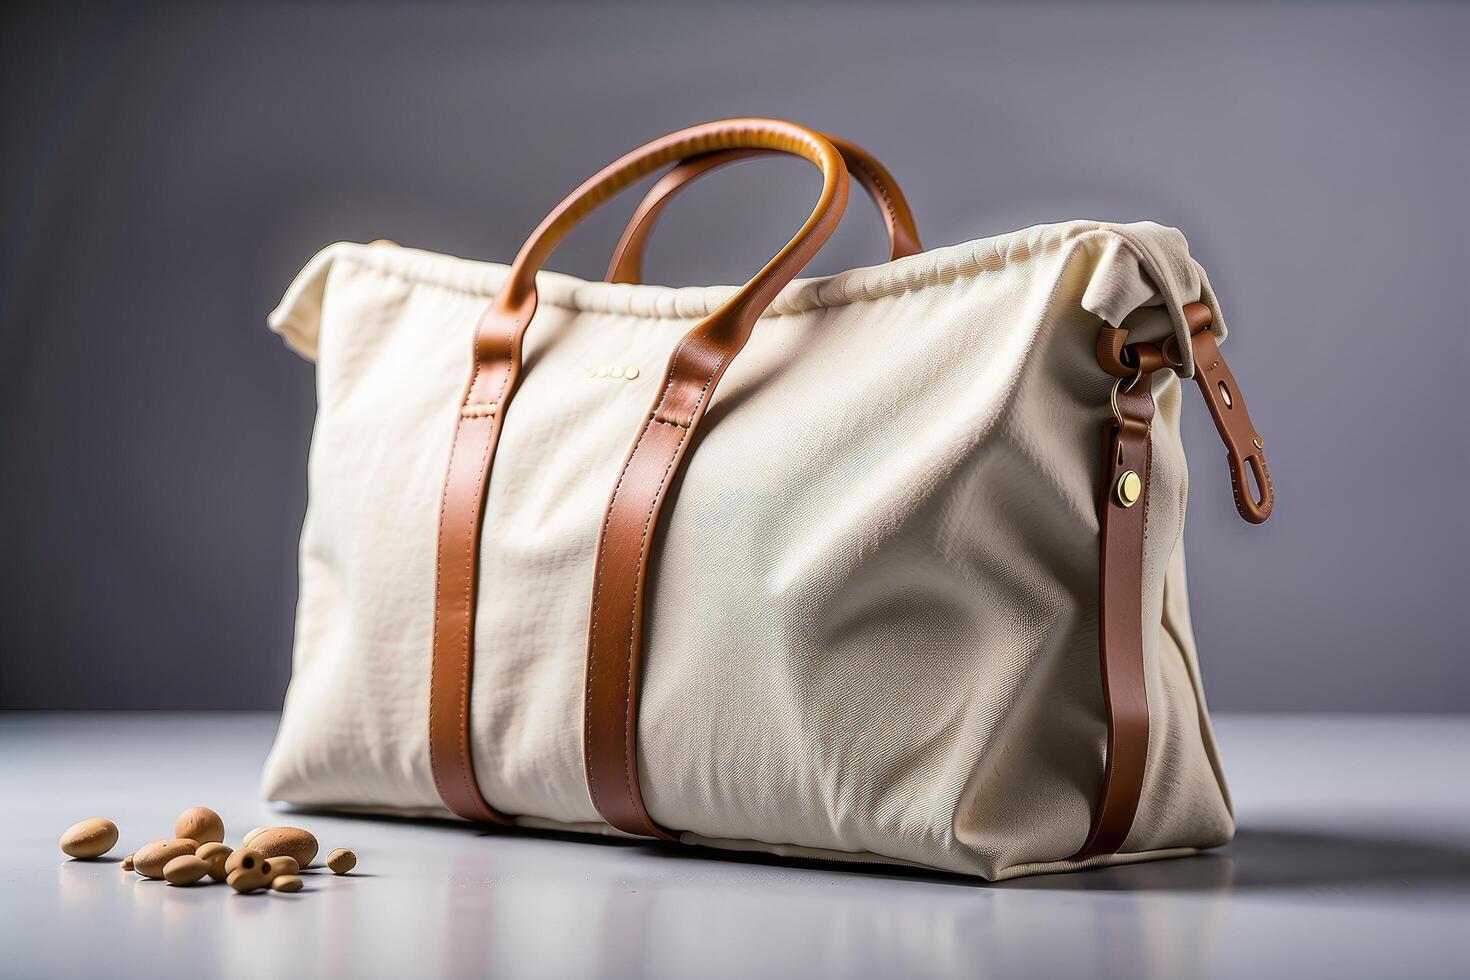 Chic Cream-Colored Duffel Bag with Brown Leather Accents - Stylish Travel Essential for Weekend Getaways and Gym Lifestyle photo